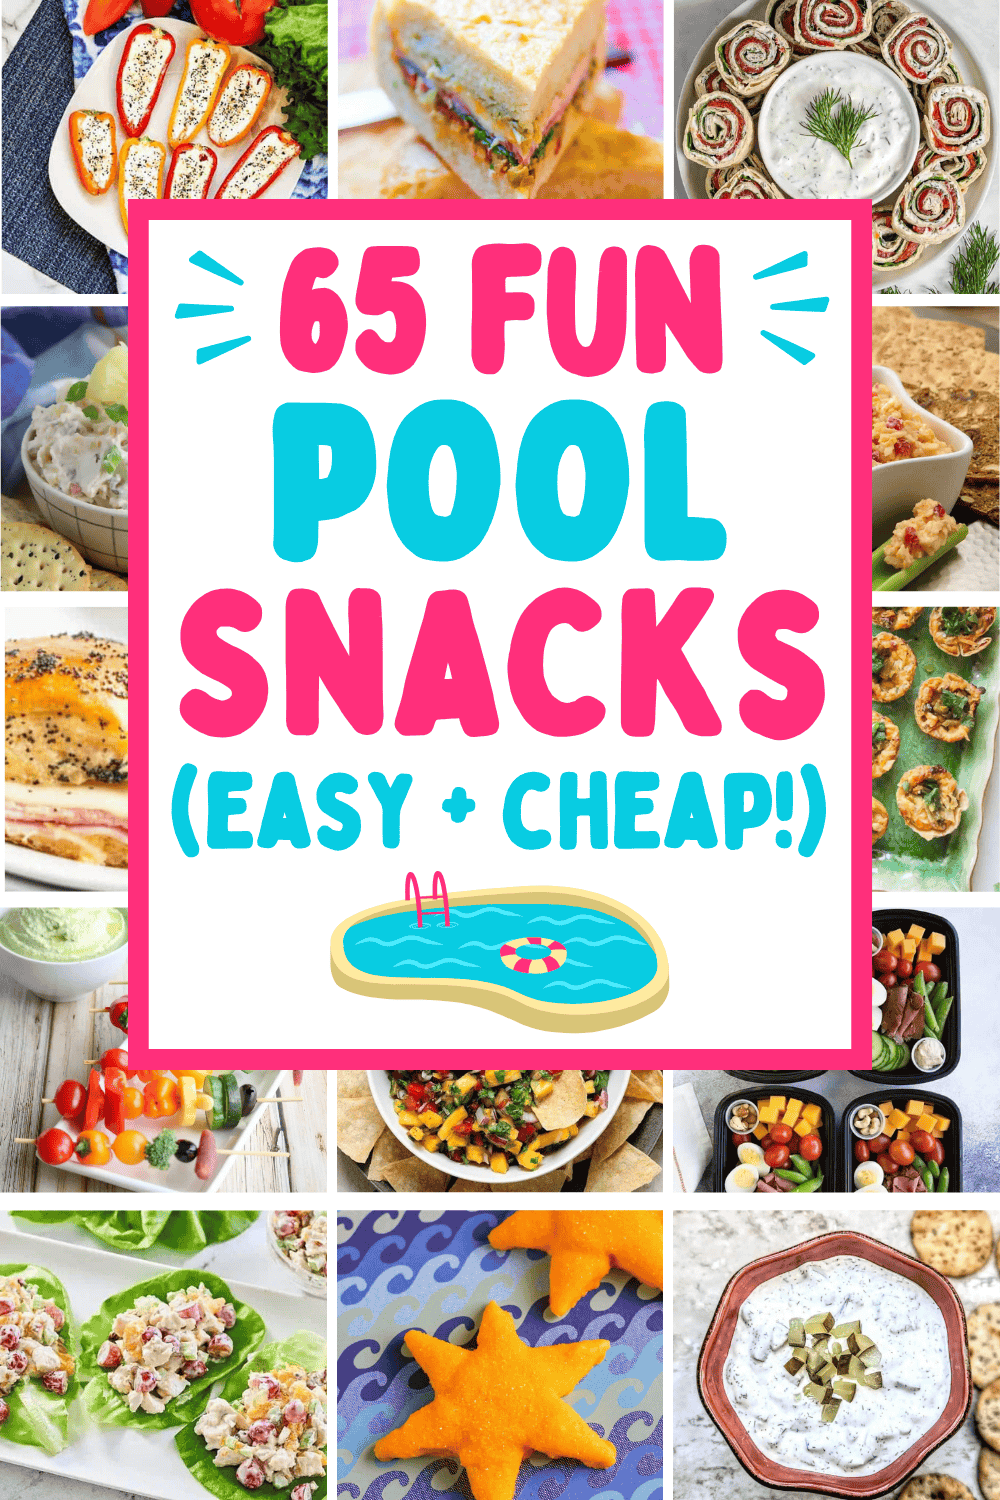 Easy summer pool snacks! These fun poolside snacks include easy summer finger foods and picnic lunch ideas for kids and adults. Perfect for your pool day! Fun pool snacks for kids, summer pool snacks beach party, summer pool snack ideas, easy poolside snacks summer, cheap pool snacks, quick easy pool snacks, pool food ideas summer, boat snacks, quick easy summer snacks, summer pool party snacks, easy beach day food ideas, picnic lunch ideas families, poolside food ideas, healthy pool snacks.